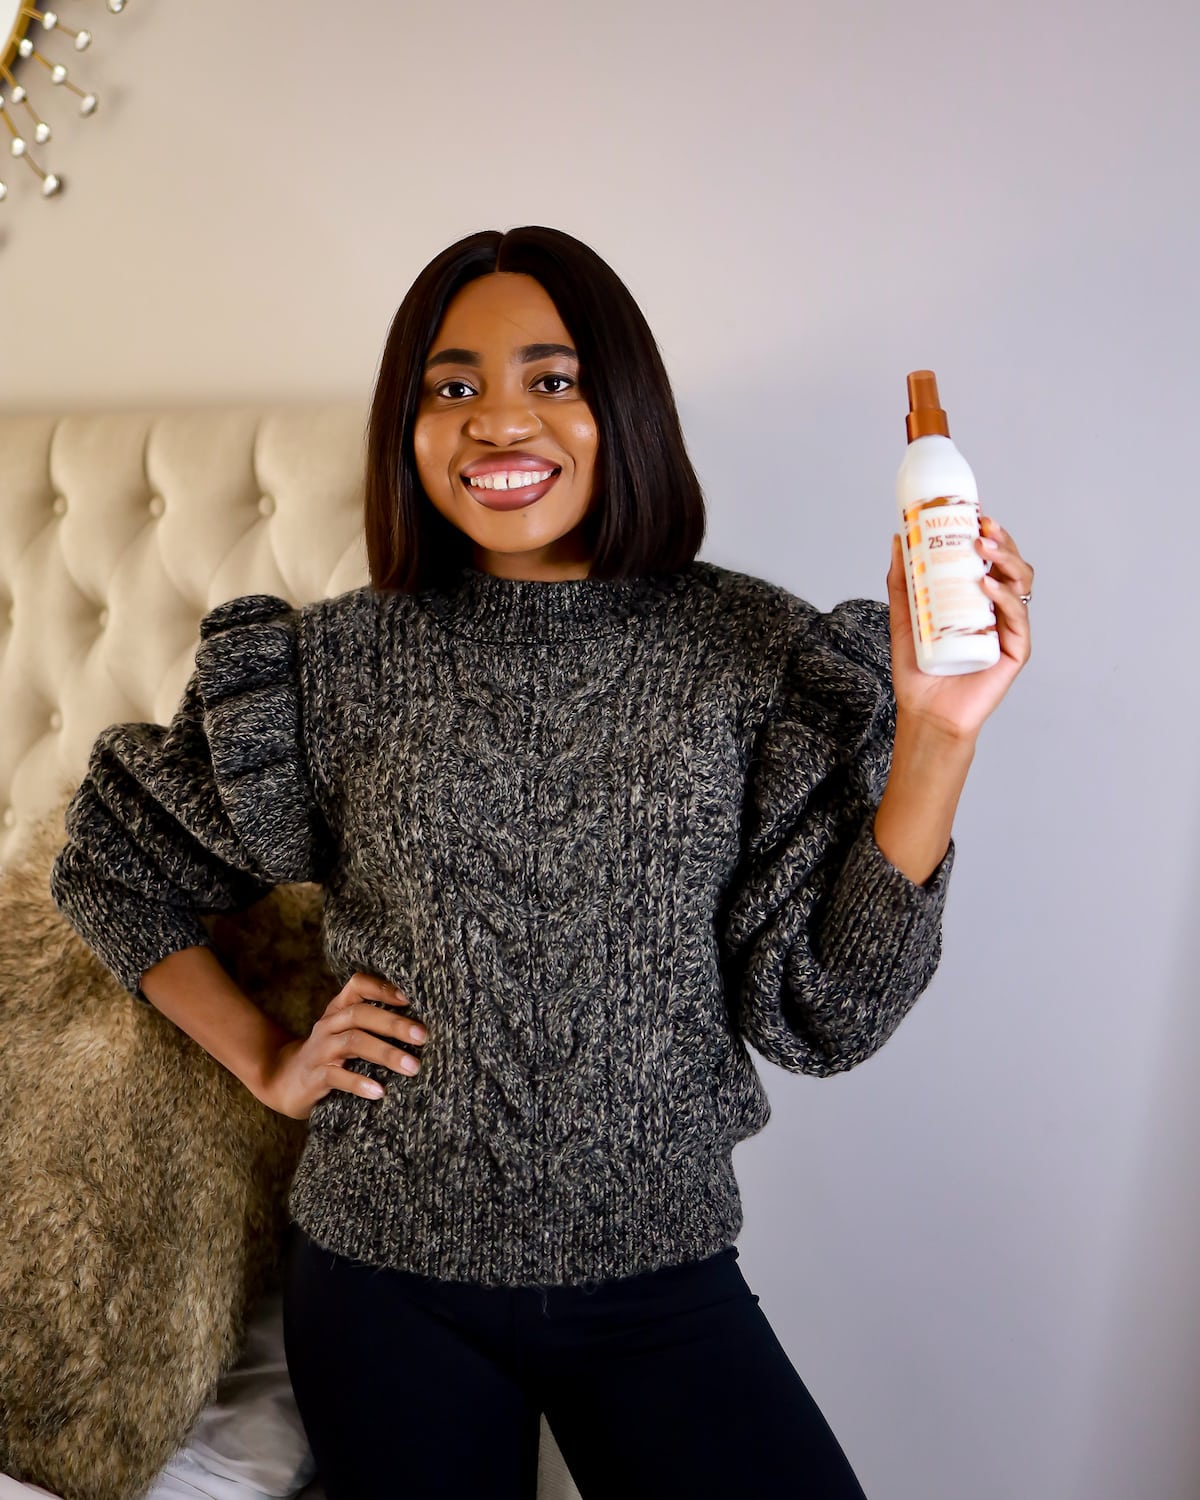 25 Benefits of Mizani's Miracle Milk Conditioner - It contains coconut oil, fennel seed extract, and smells amazing. Is this REALLY a miracle? I'm spilling the tea in today's review post.